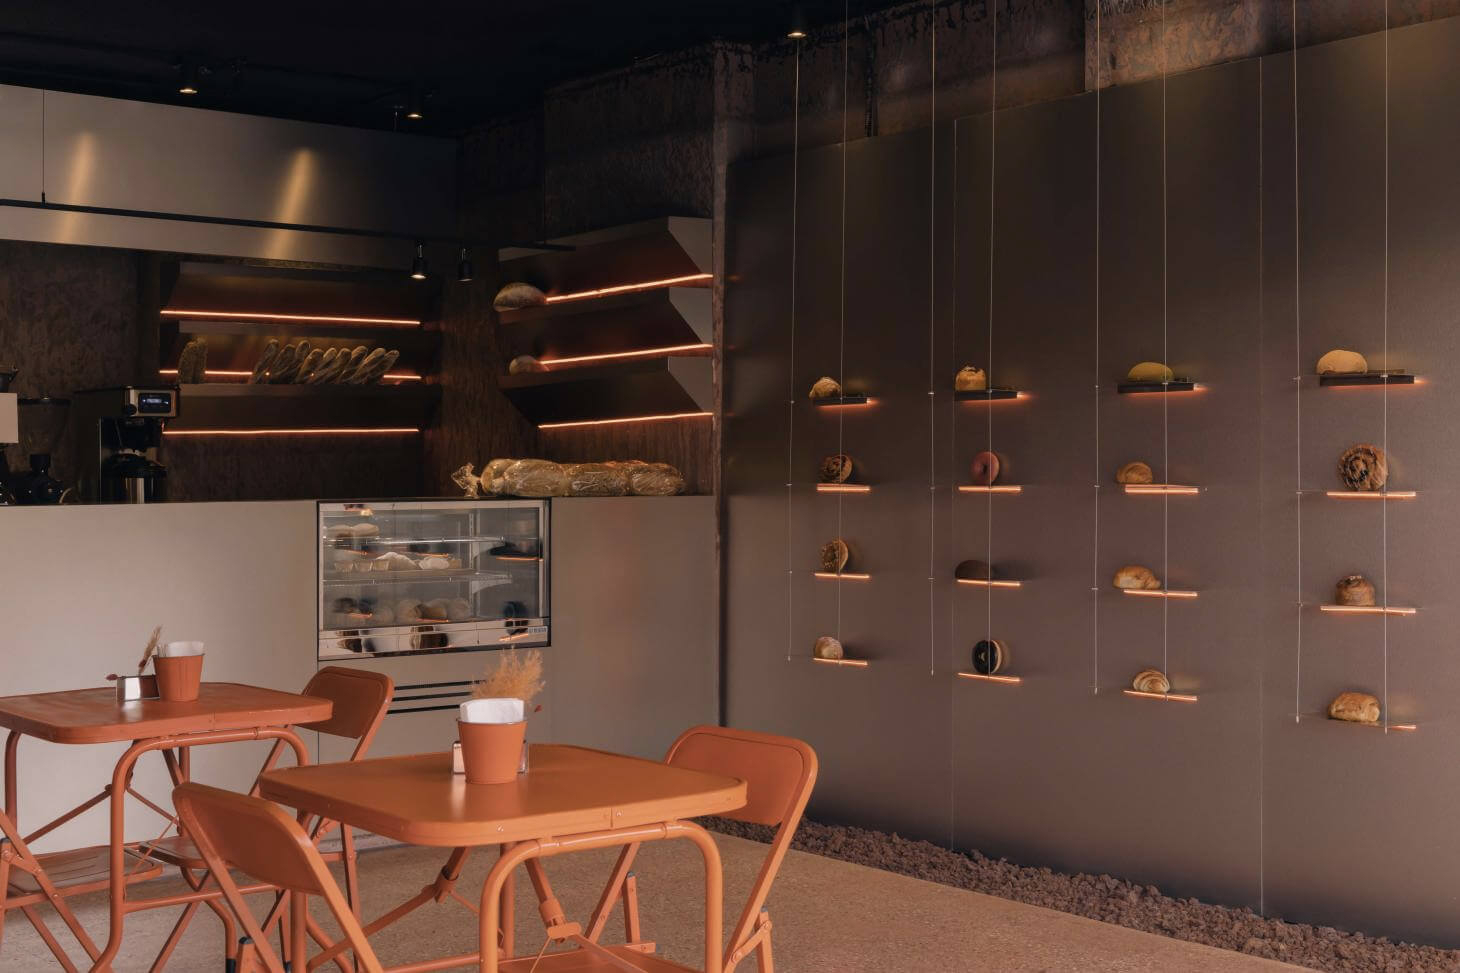 Costra bakery riffs on the volcanic landscape of the Mexico City 2 1